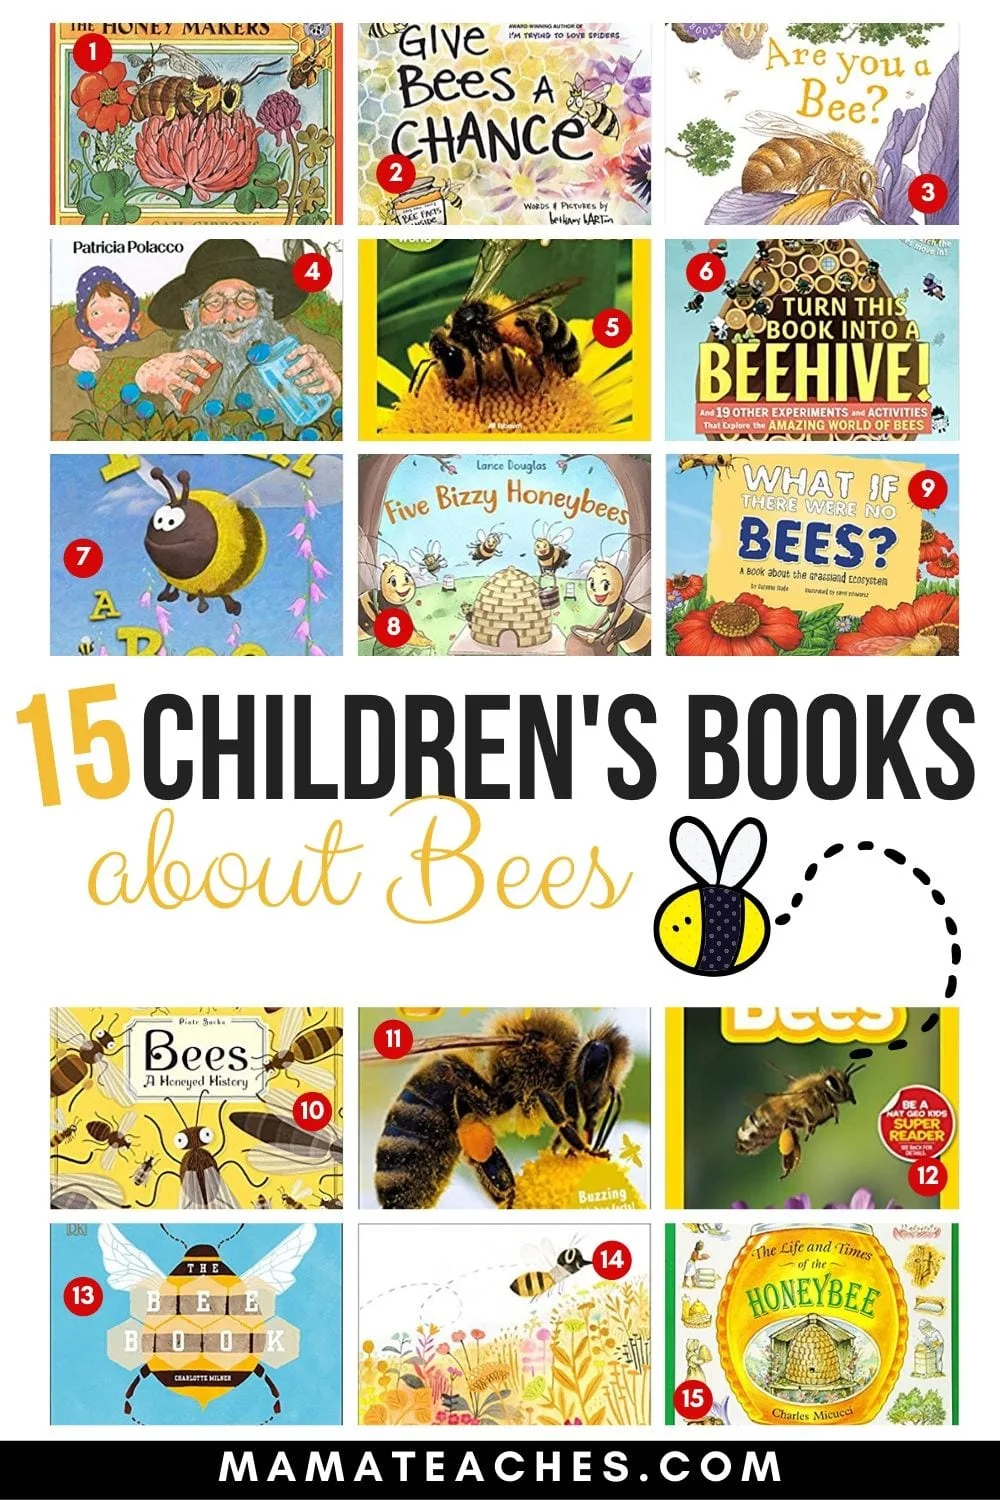 15 Children's Books About Bees! Teach children about the most amazing pollinators with these kid-friendly picture books filled with facts! MamaTeaches.com